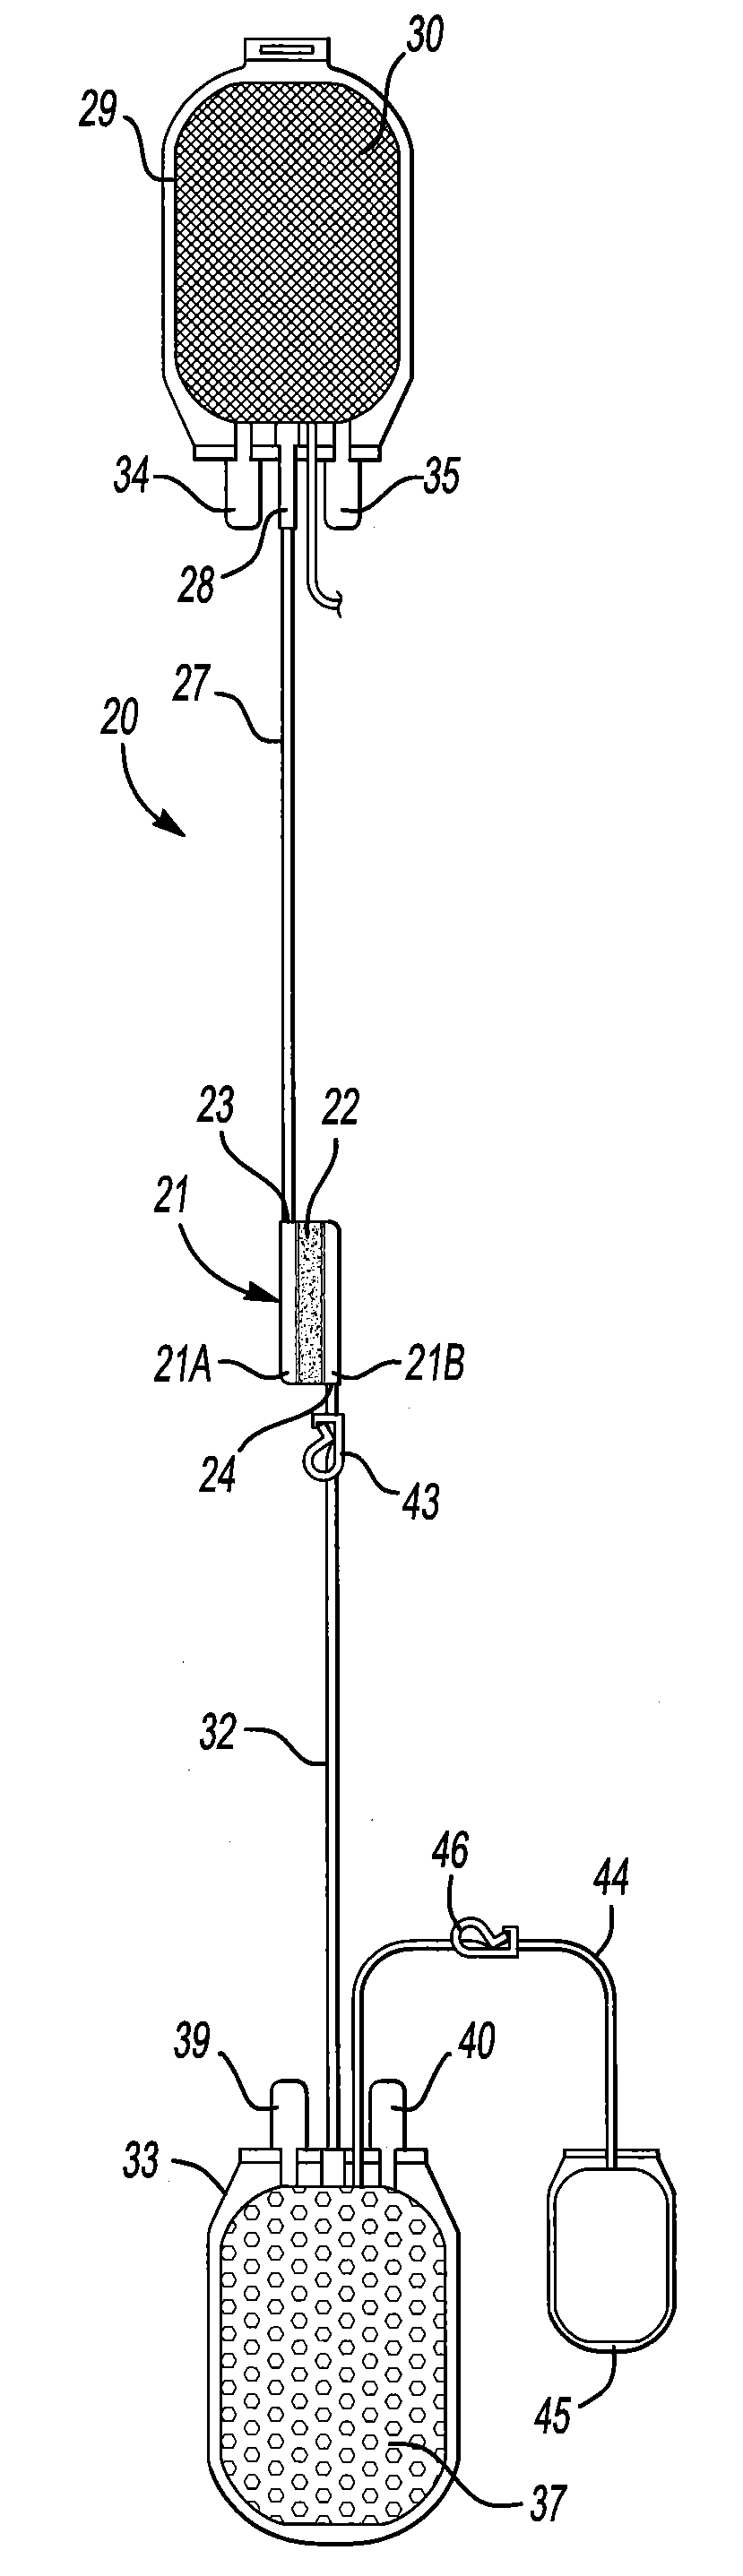 Prechargable fluid filtration method and apparatus